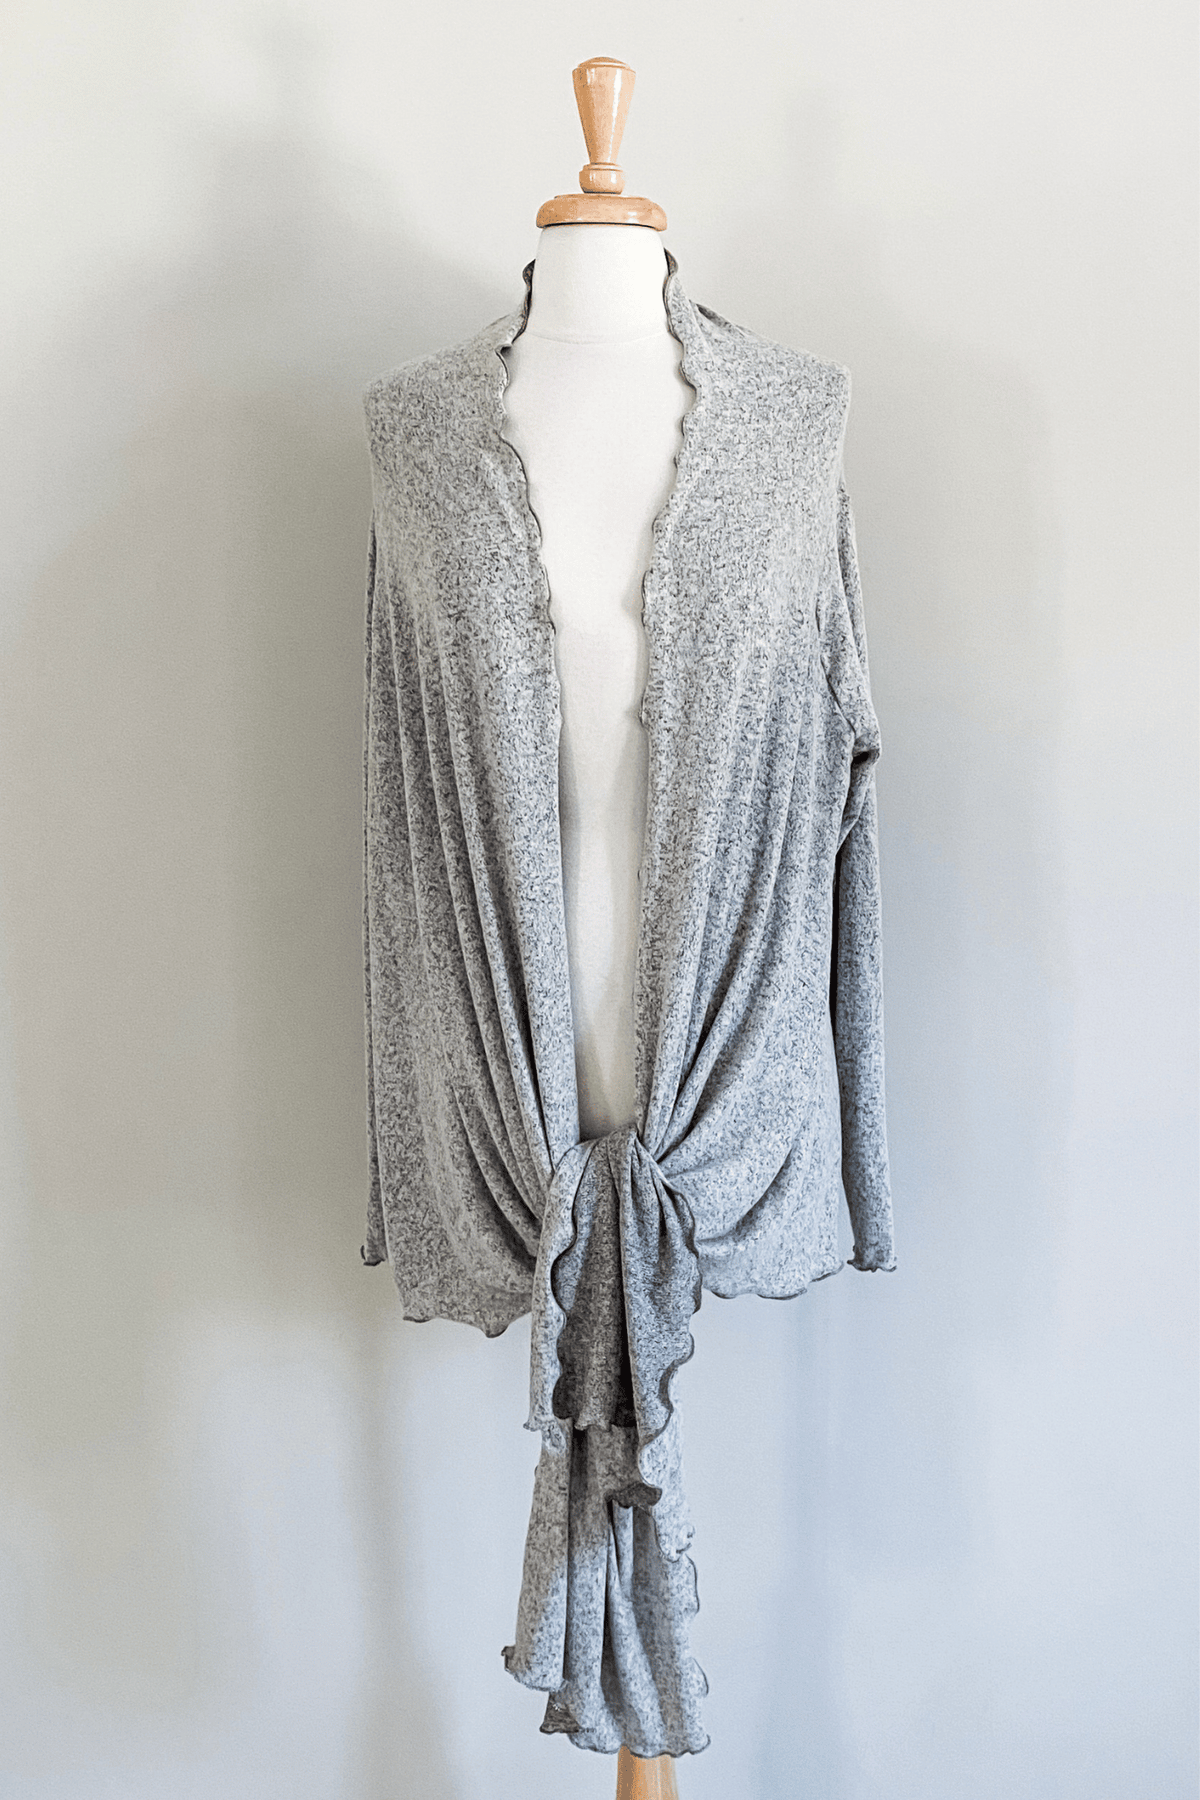 Versa Wrap in Grey Mix color from Diane Kroe